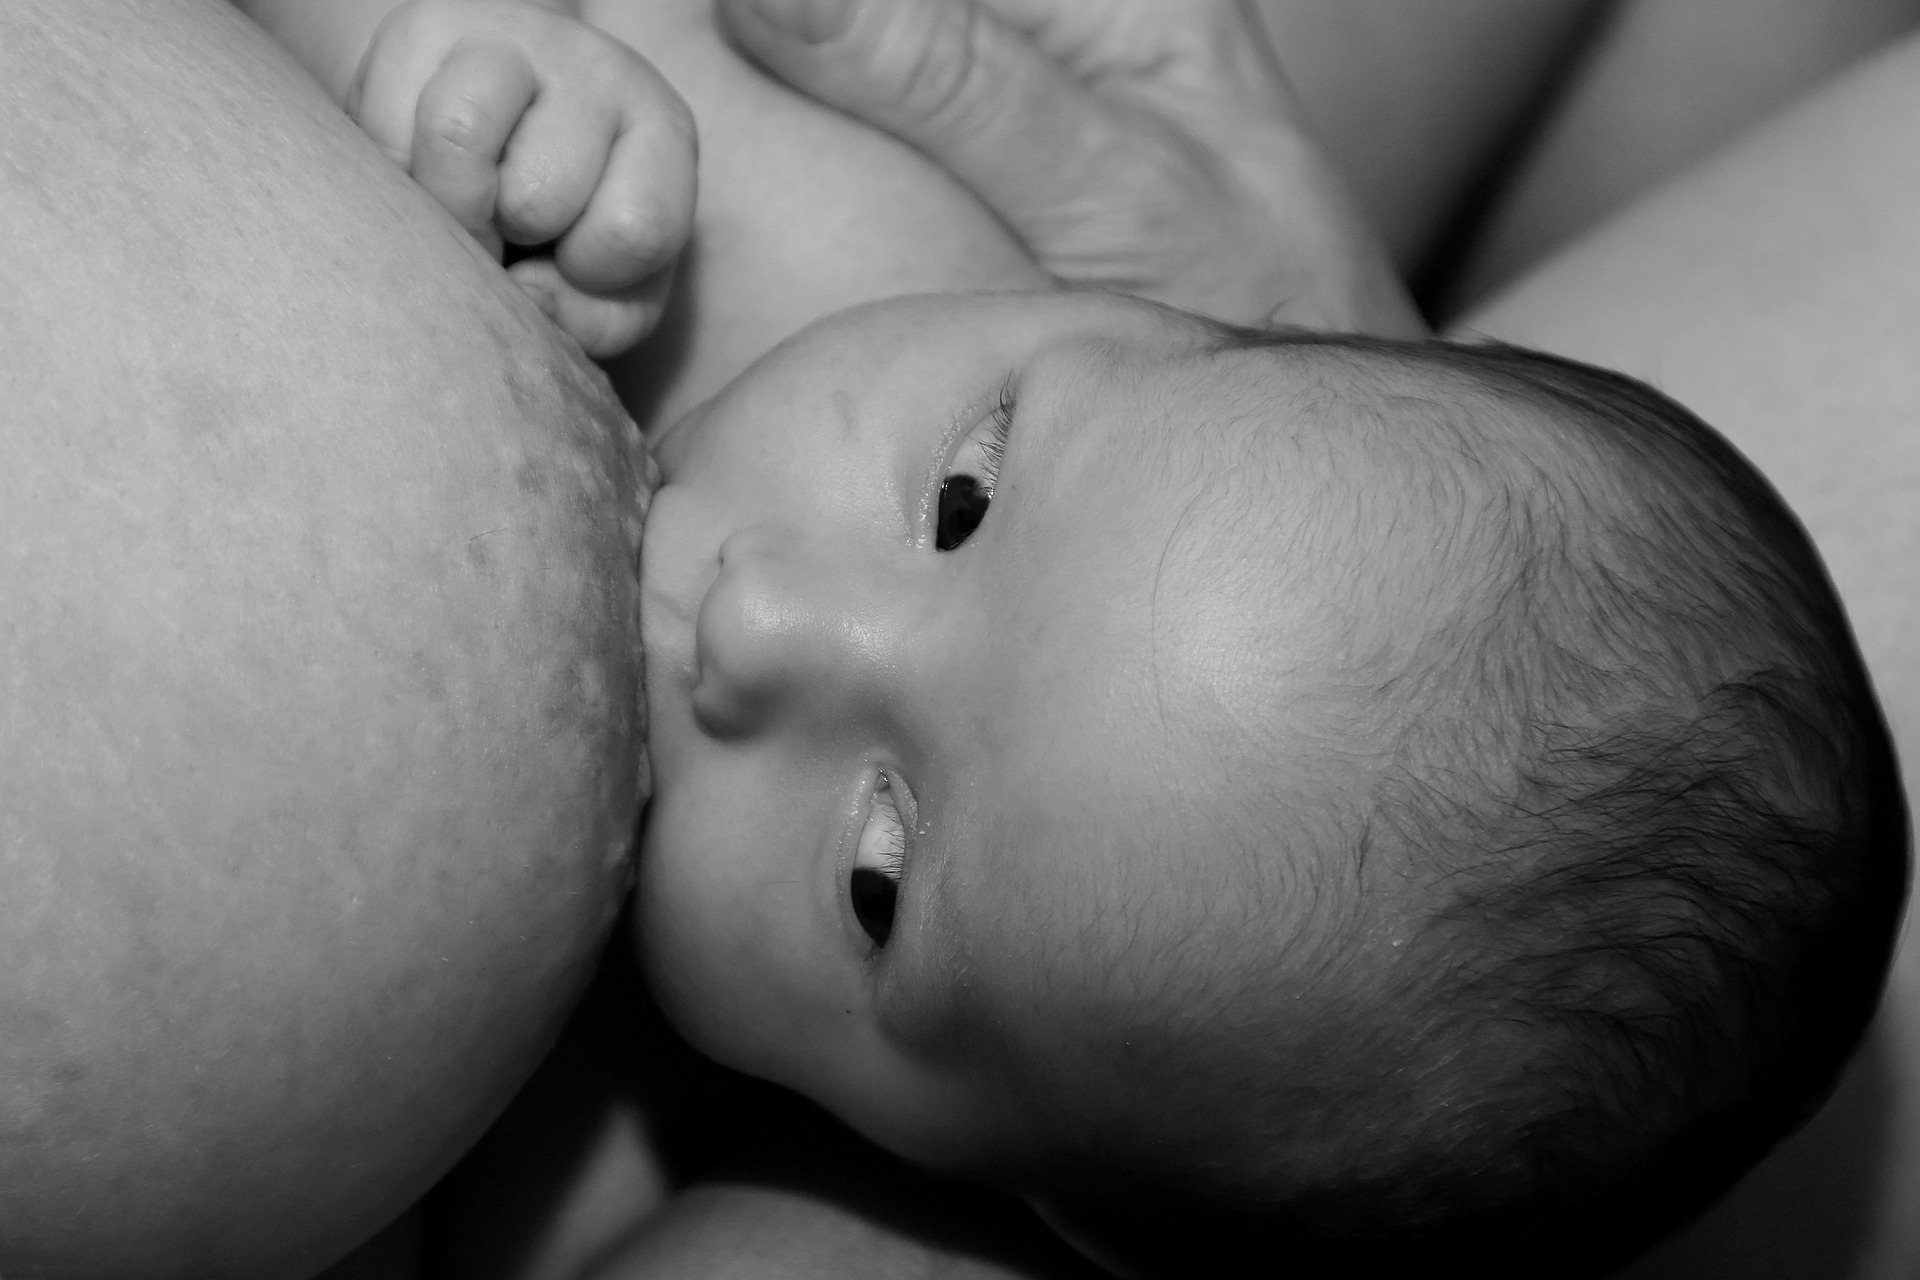 Baby sucking on mother's tit/breast